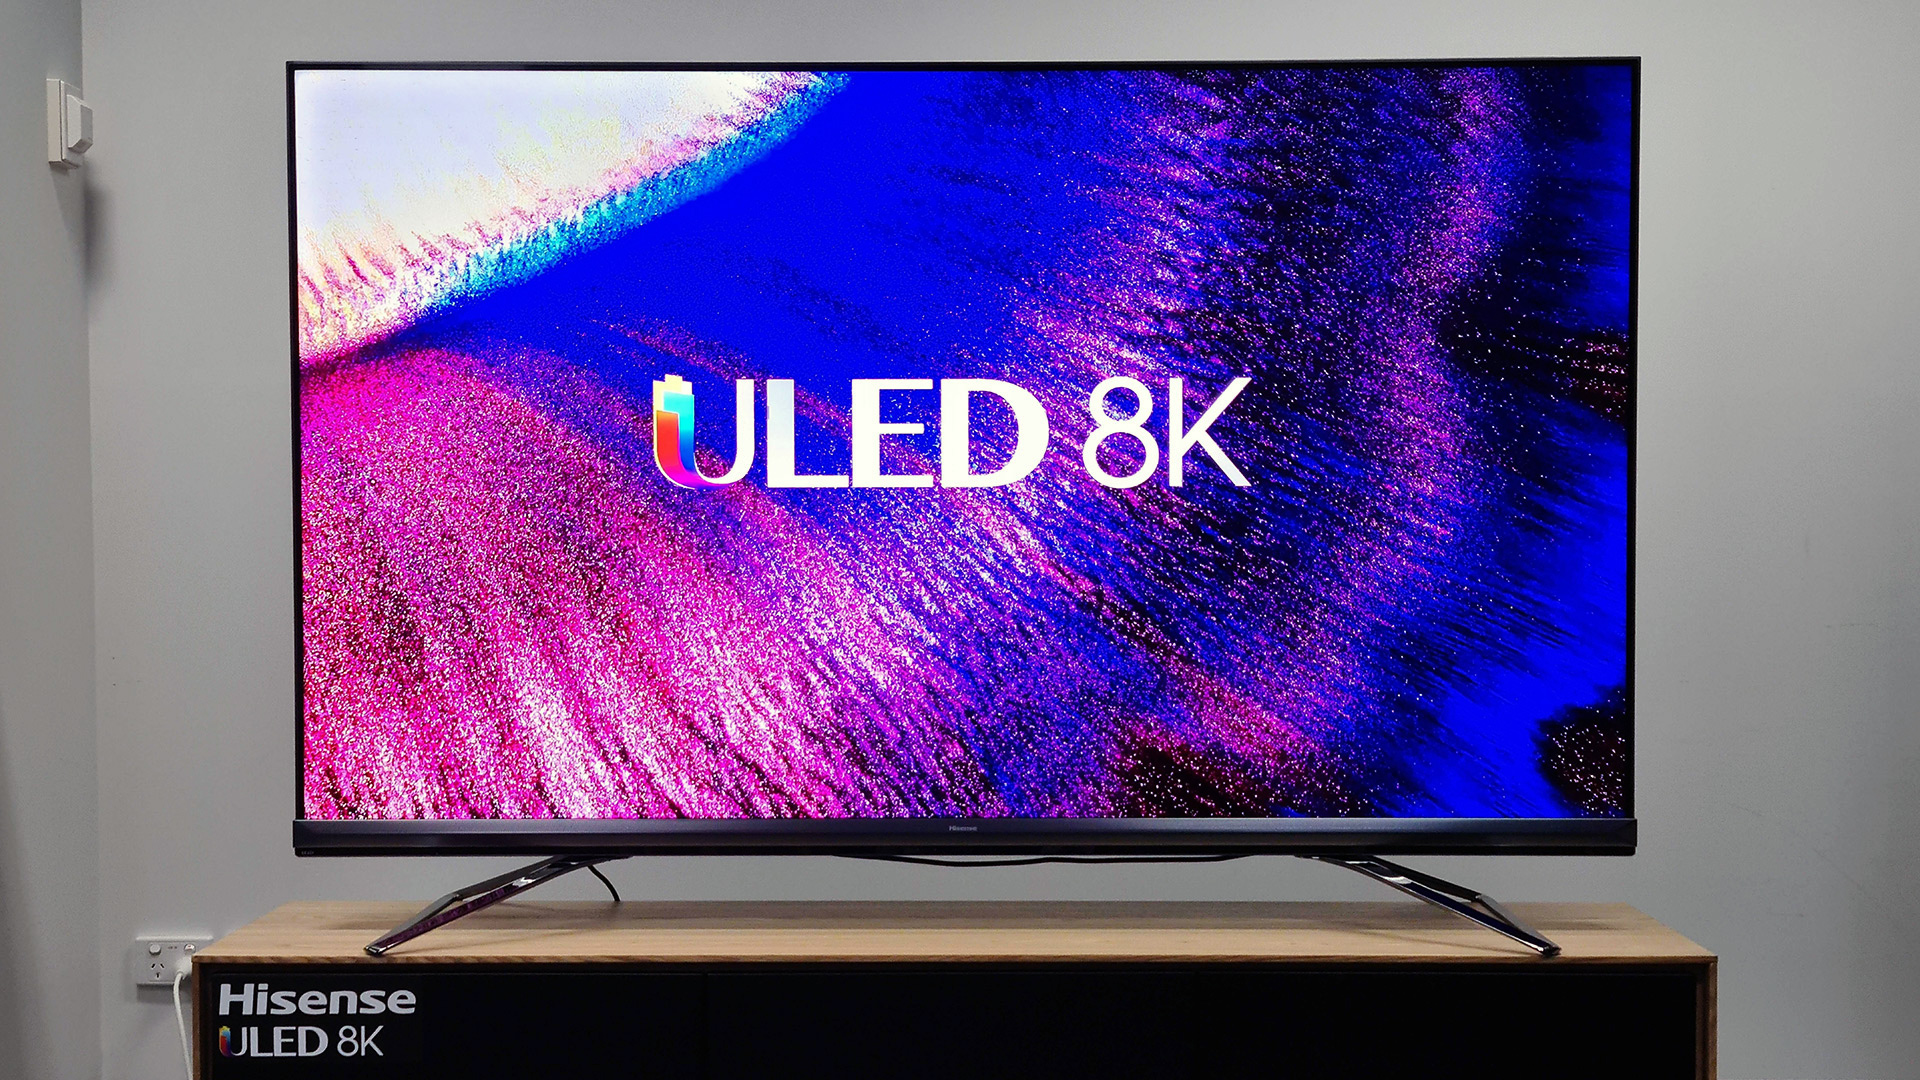 The Hisense U80G 8K ULED TV with a bright screen and abstract pink and purple display